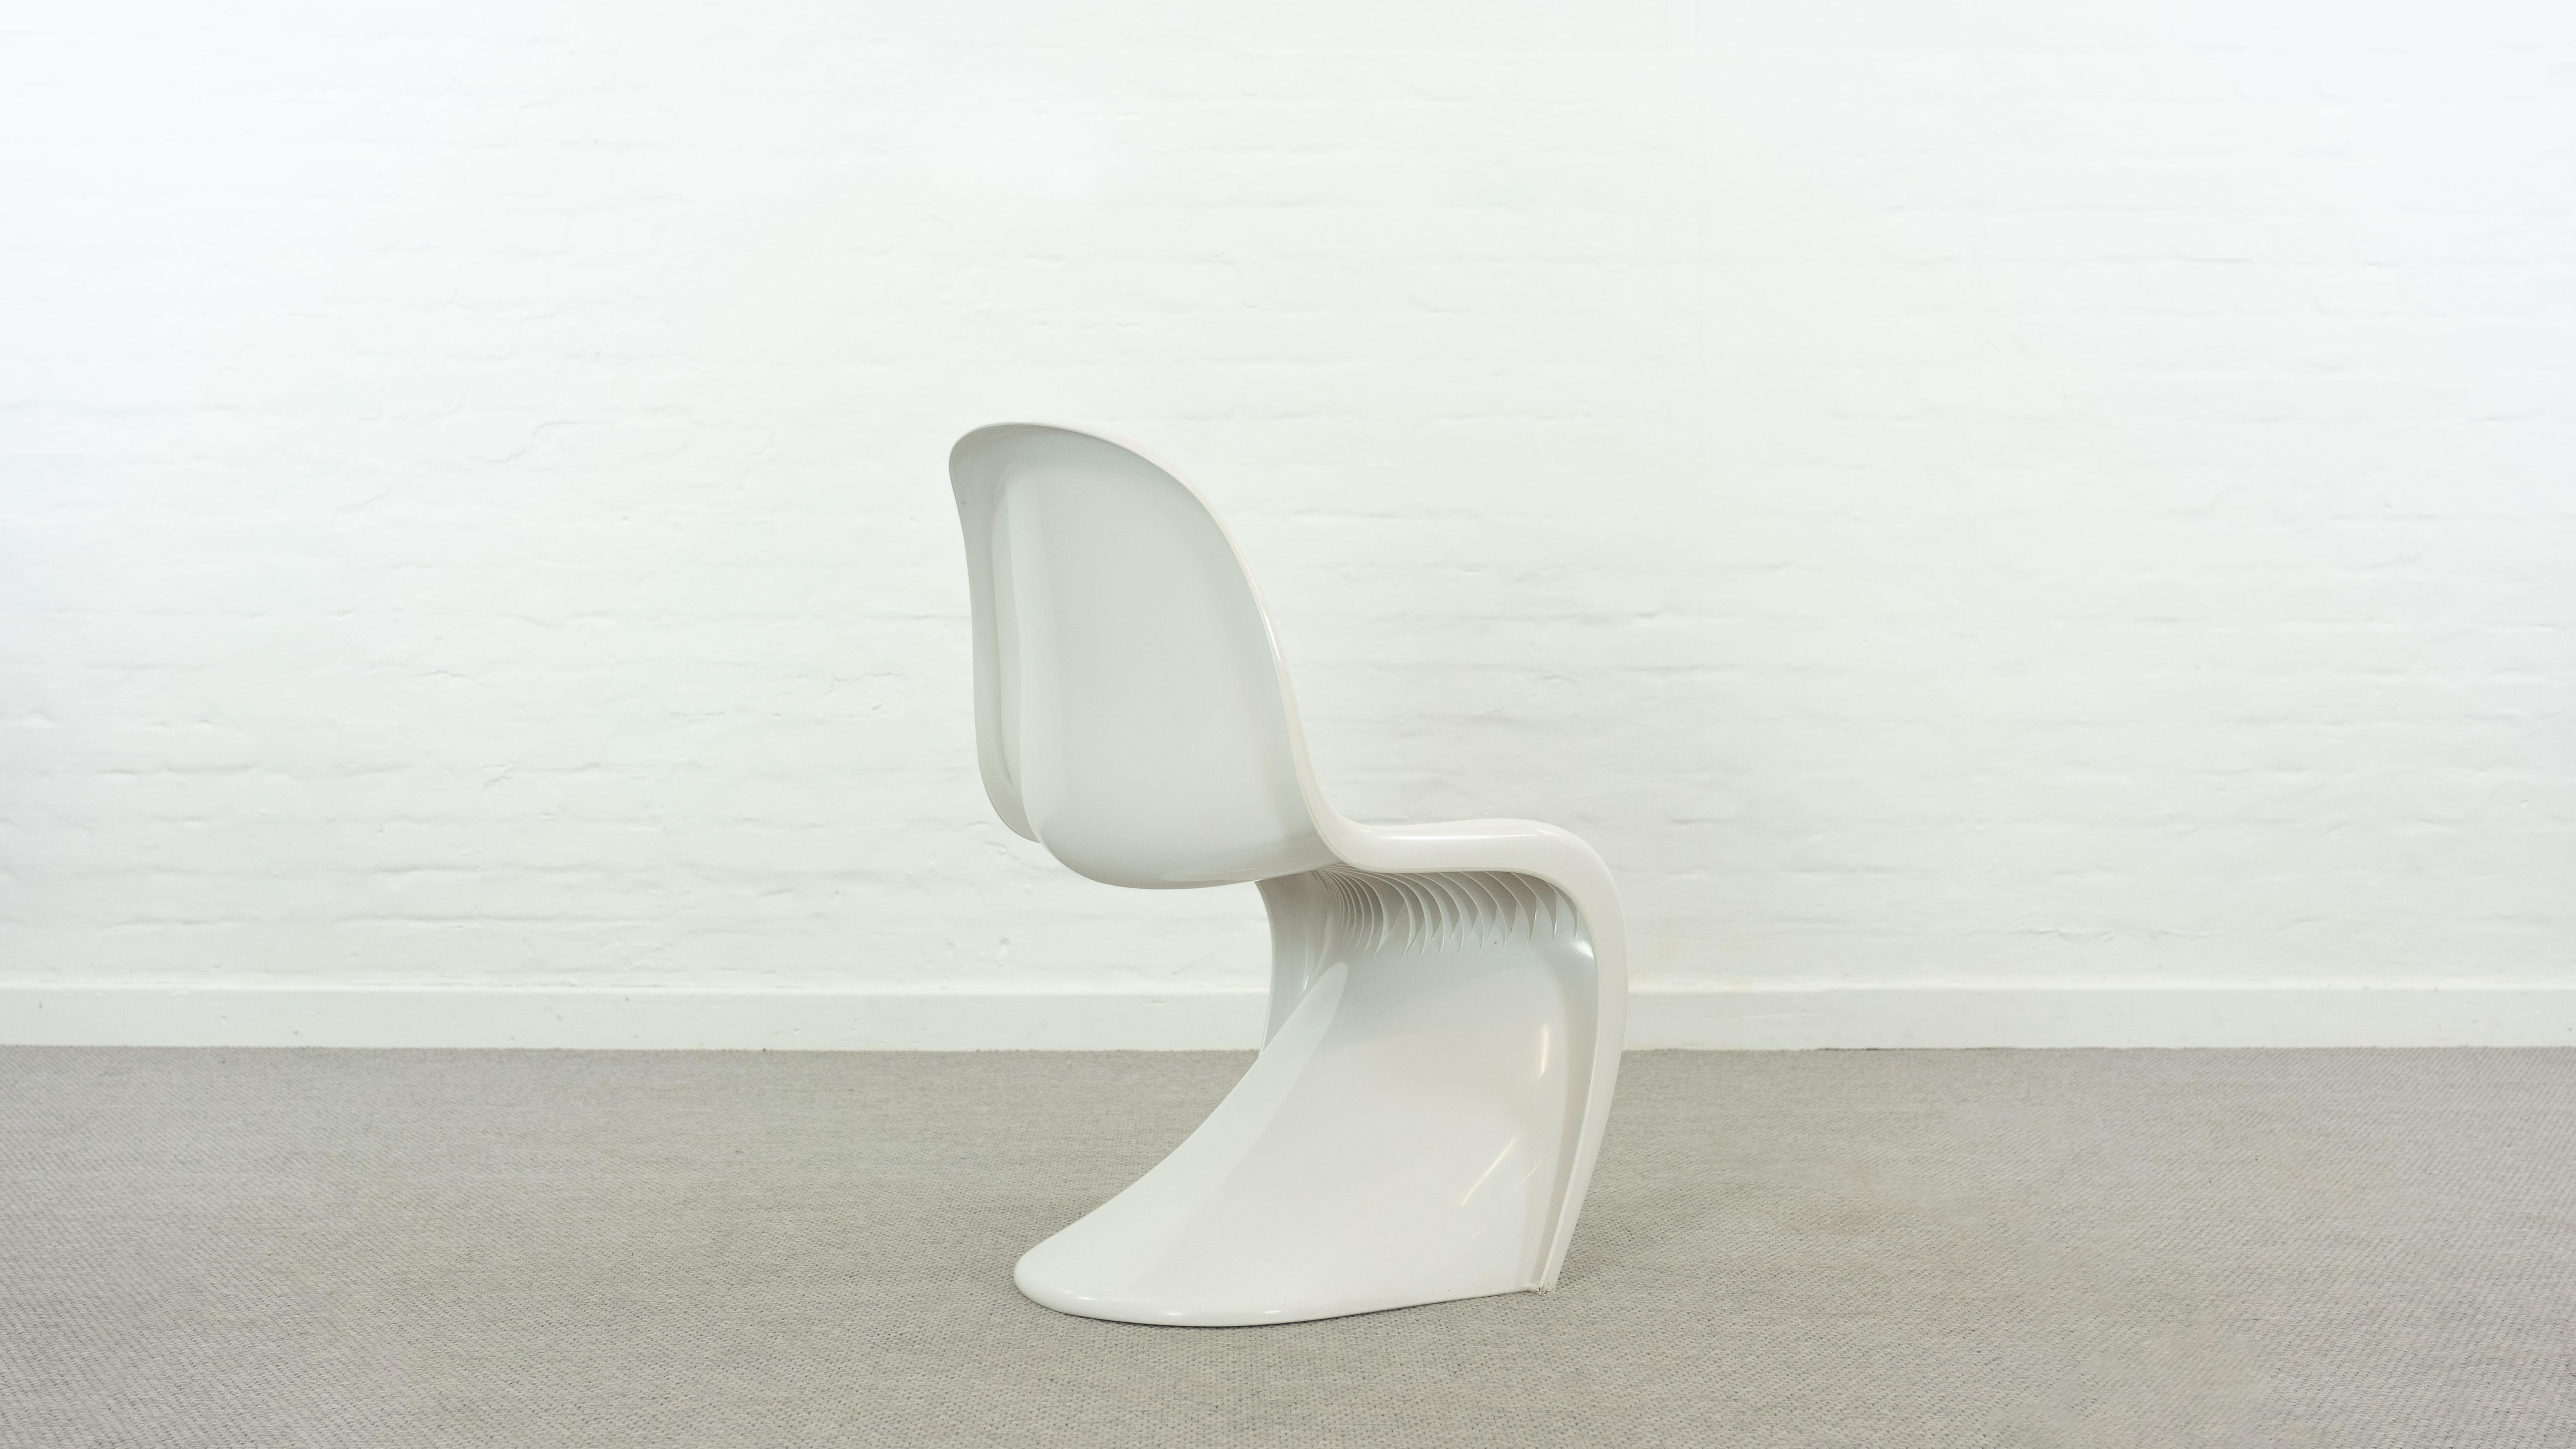 Late 20th Century Panton Chair by Verner Panton for Herman Miller / Fehlbaum, in white 1976 For Sale